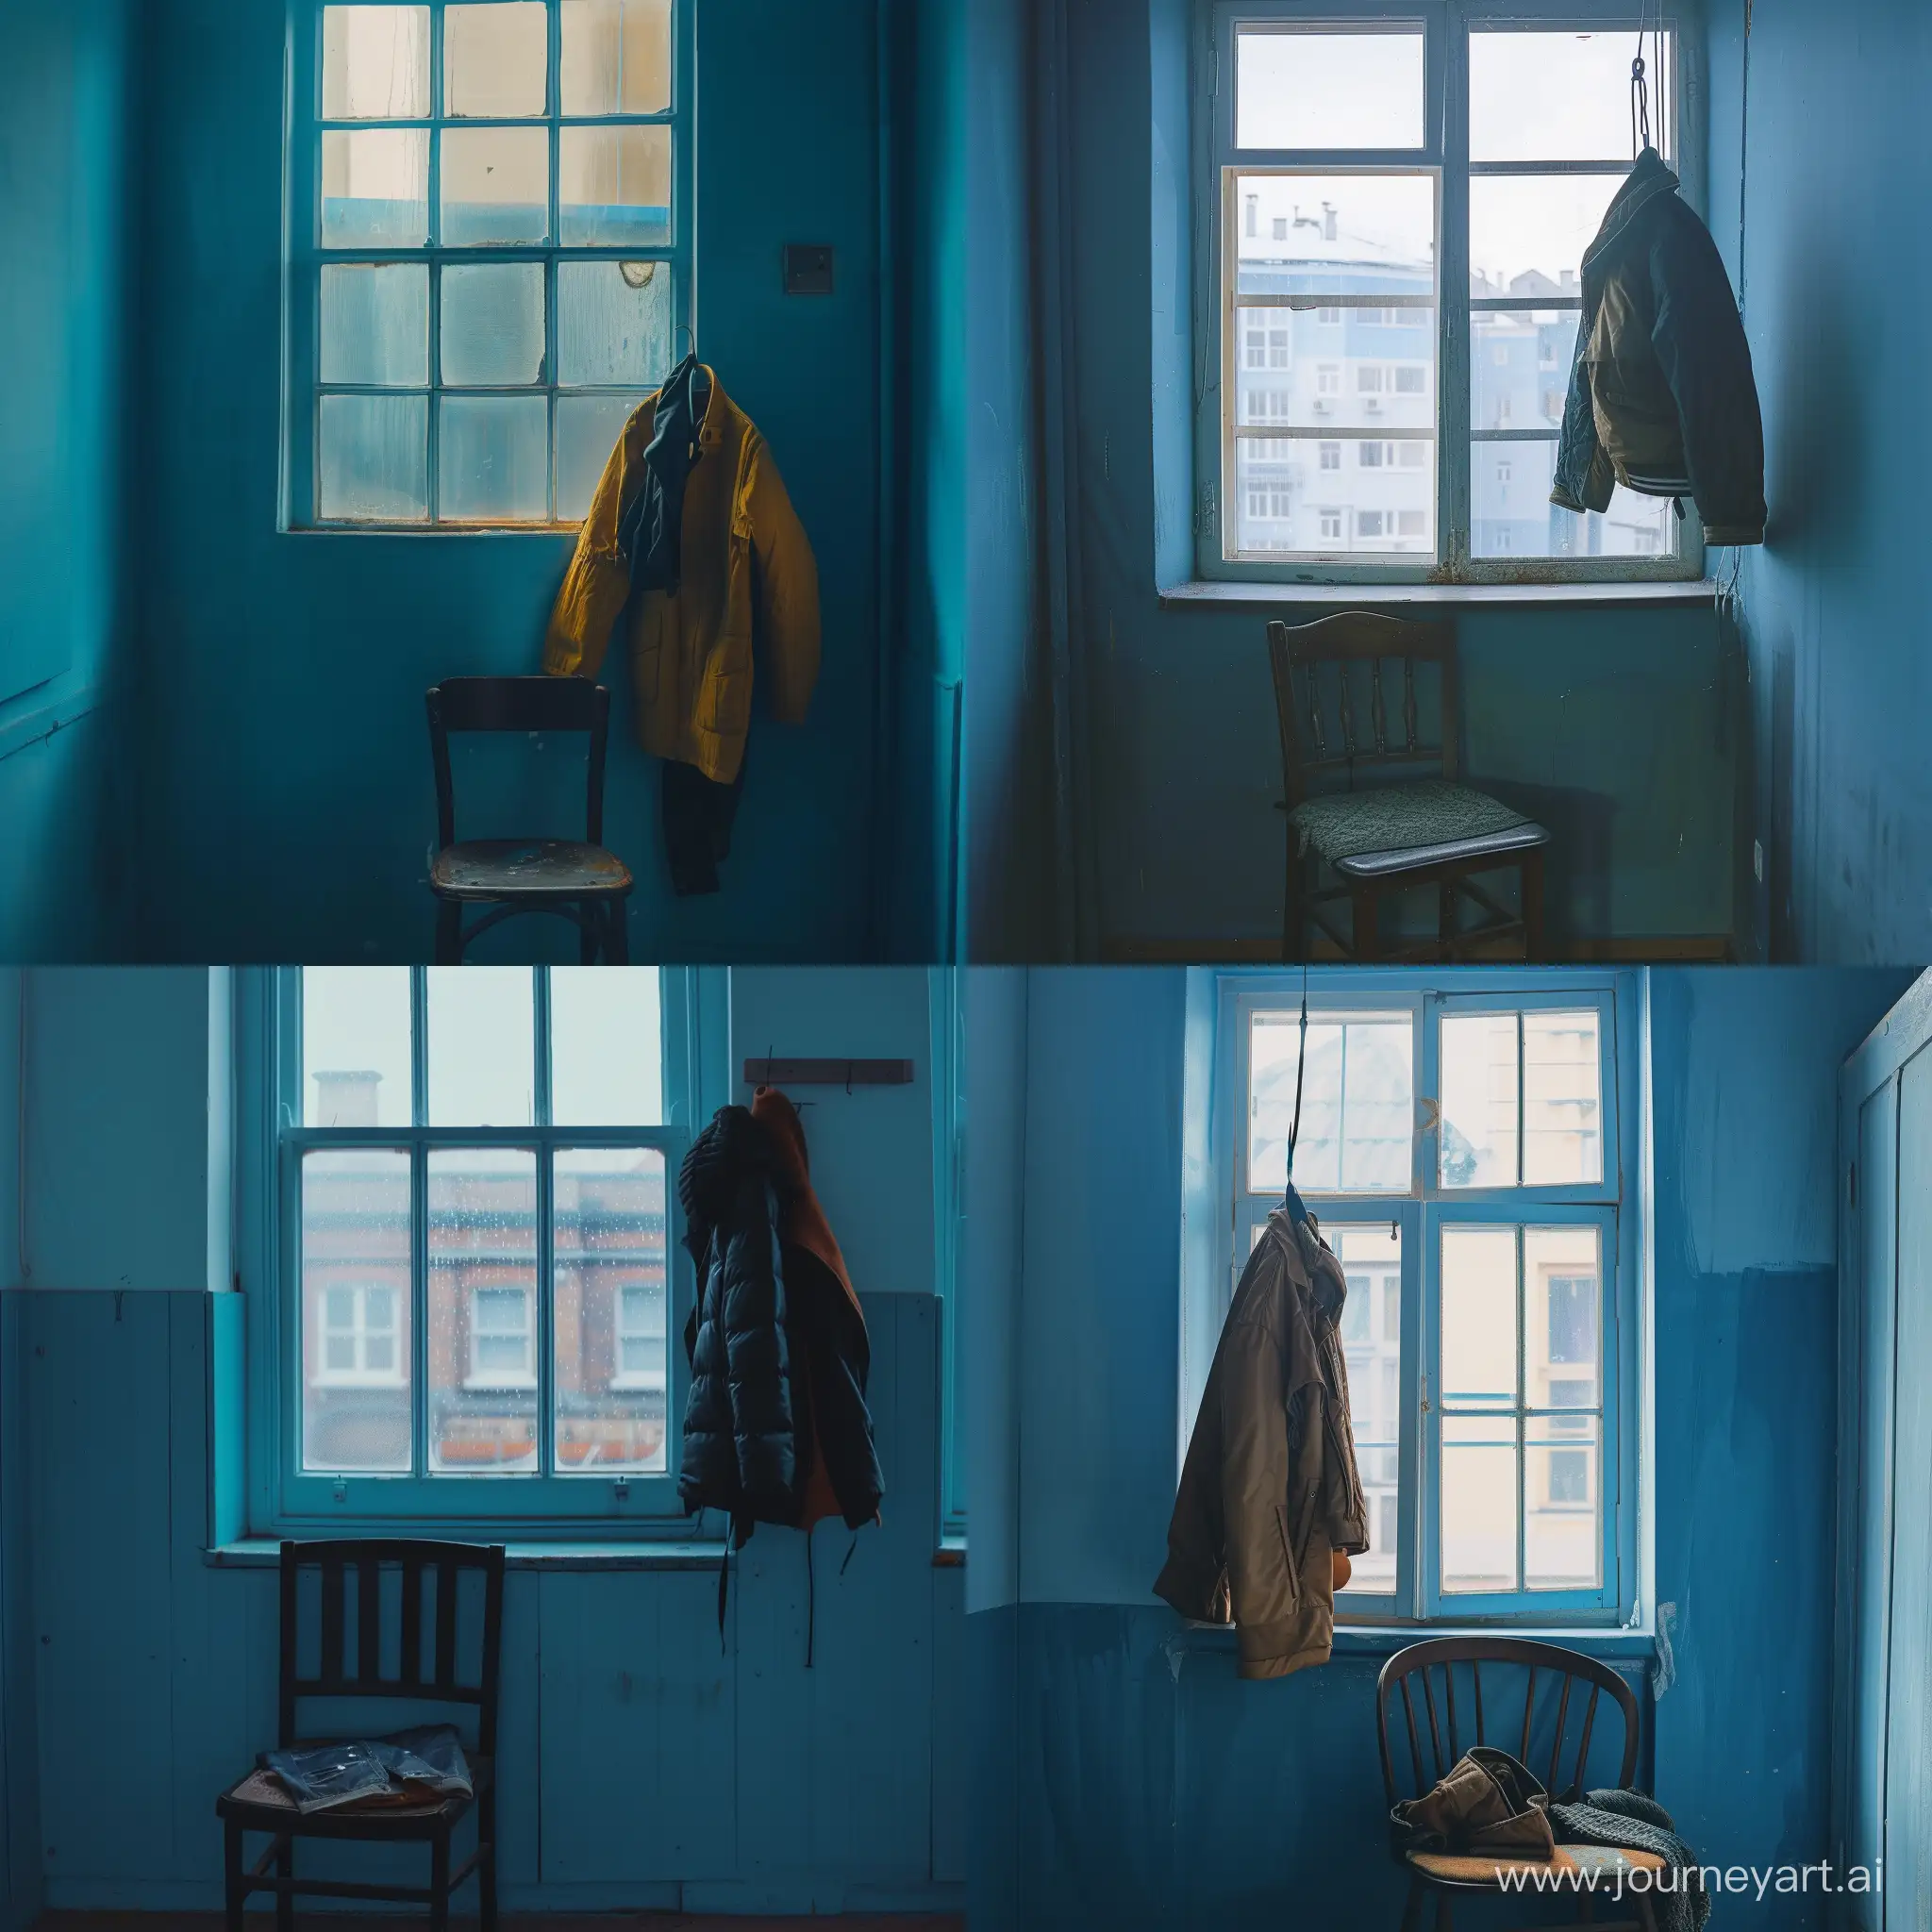 Cozy-Lofi-Blue-Room-with-Chair-and-Jacket-by-Window